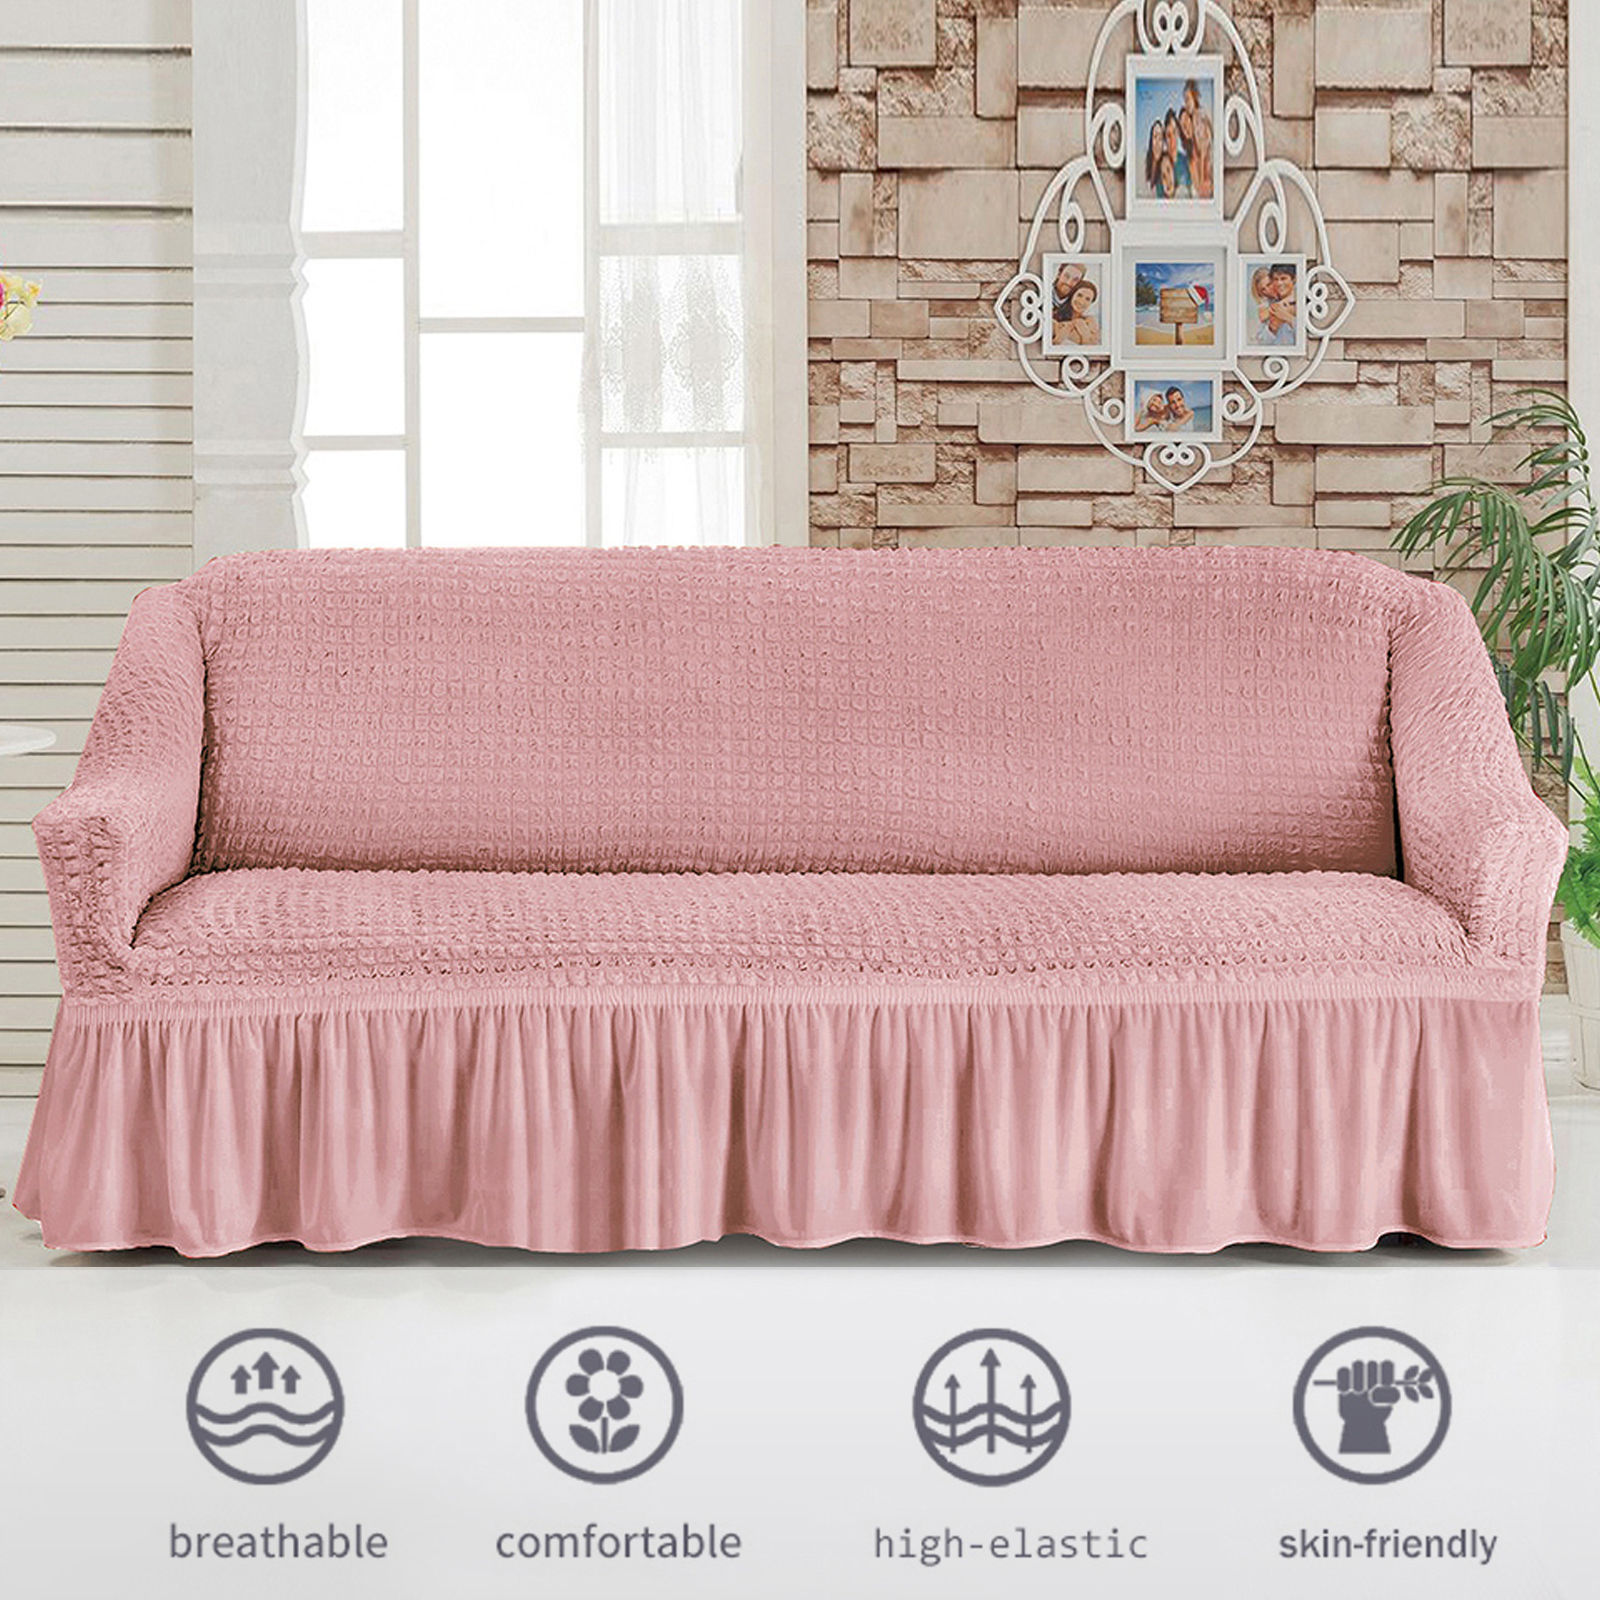 Stretch Sofa Slipcover, 3 Seater Sofa Slipcovers With Skirt With Armless Soft Sofa Cover Elastic Straps Sofa Slipcover For Living Room Kids Pets-Pink-Large